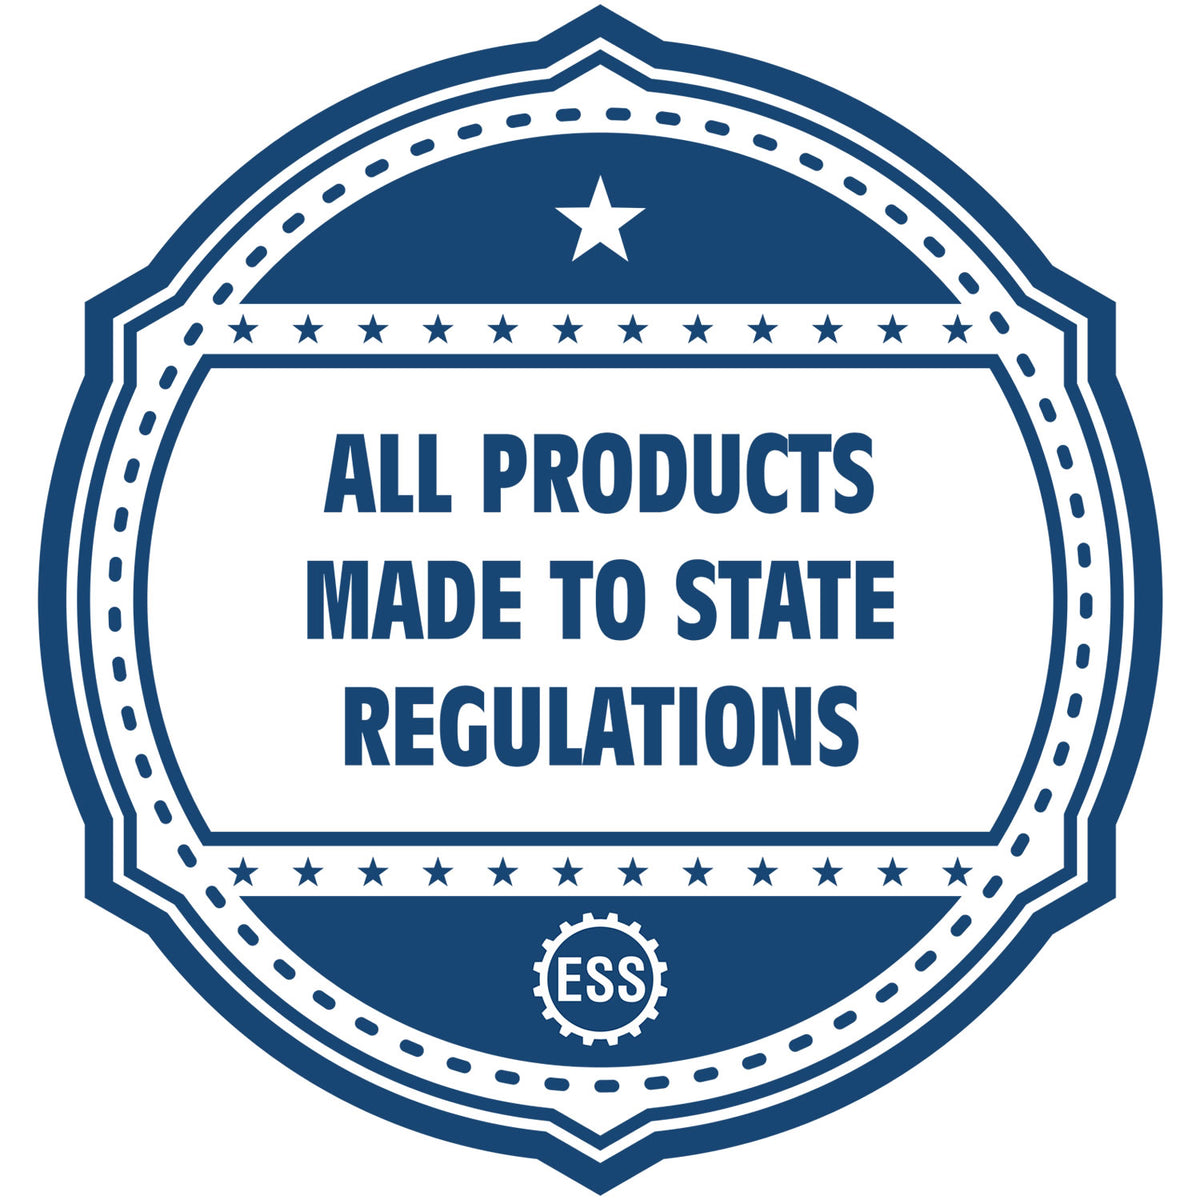 A blue icon or badge for the Gift Texas Landscape Architect Seal showing that this product is made in compliance with state regulations.